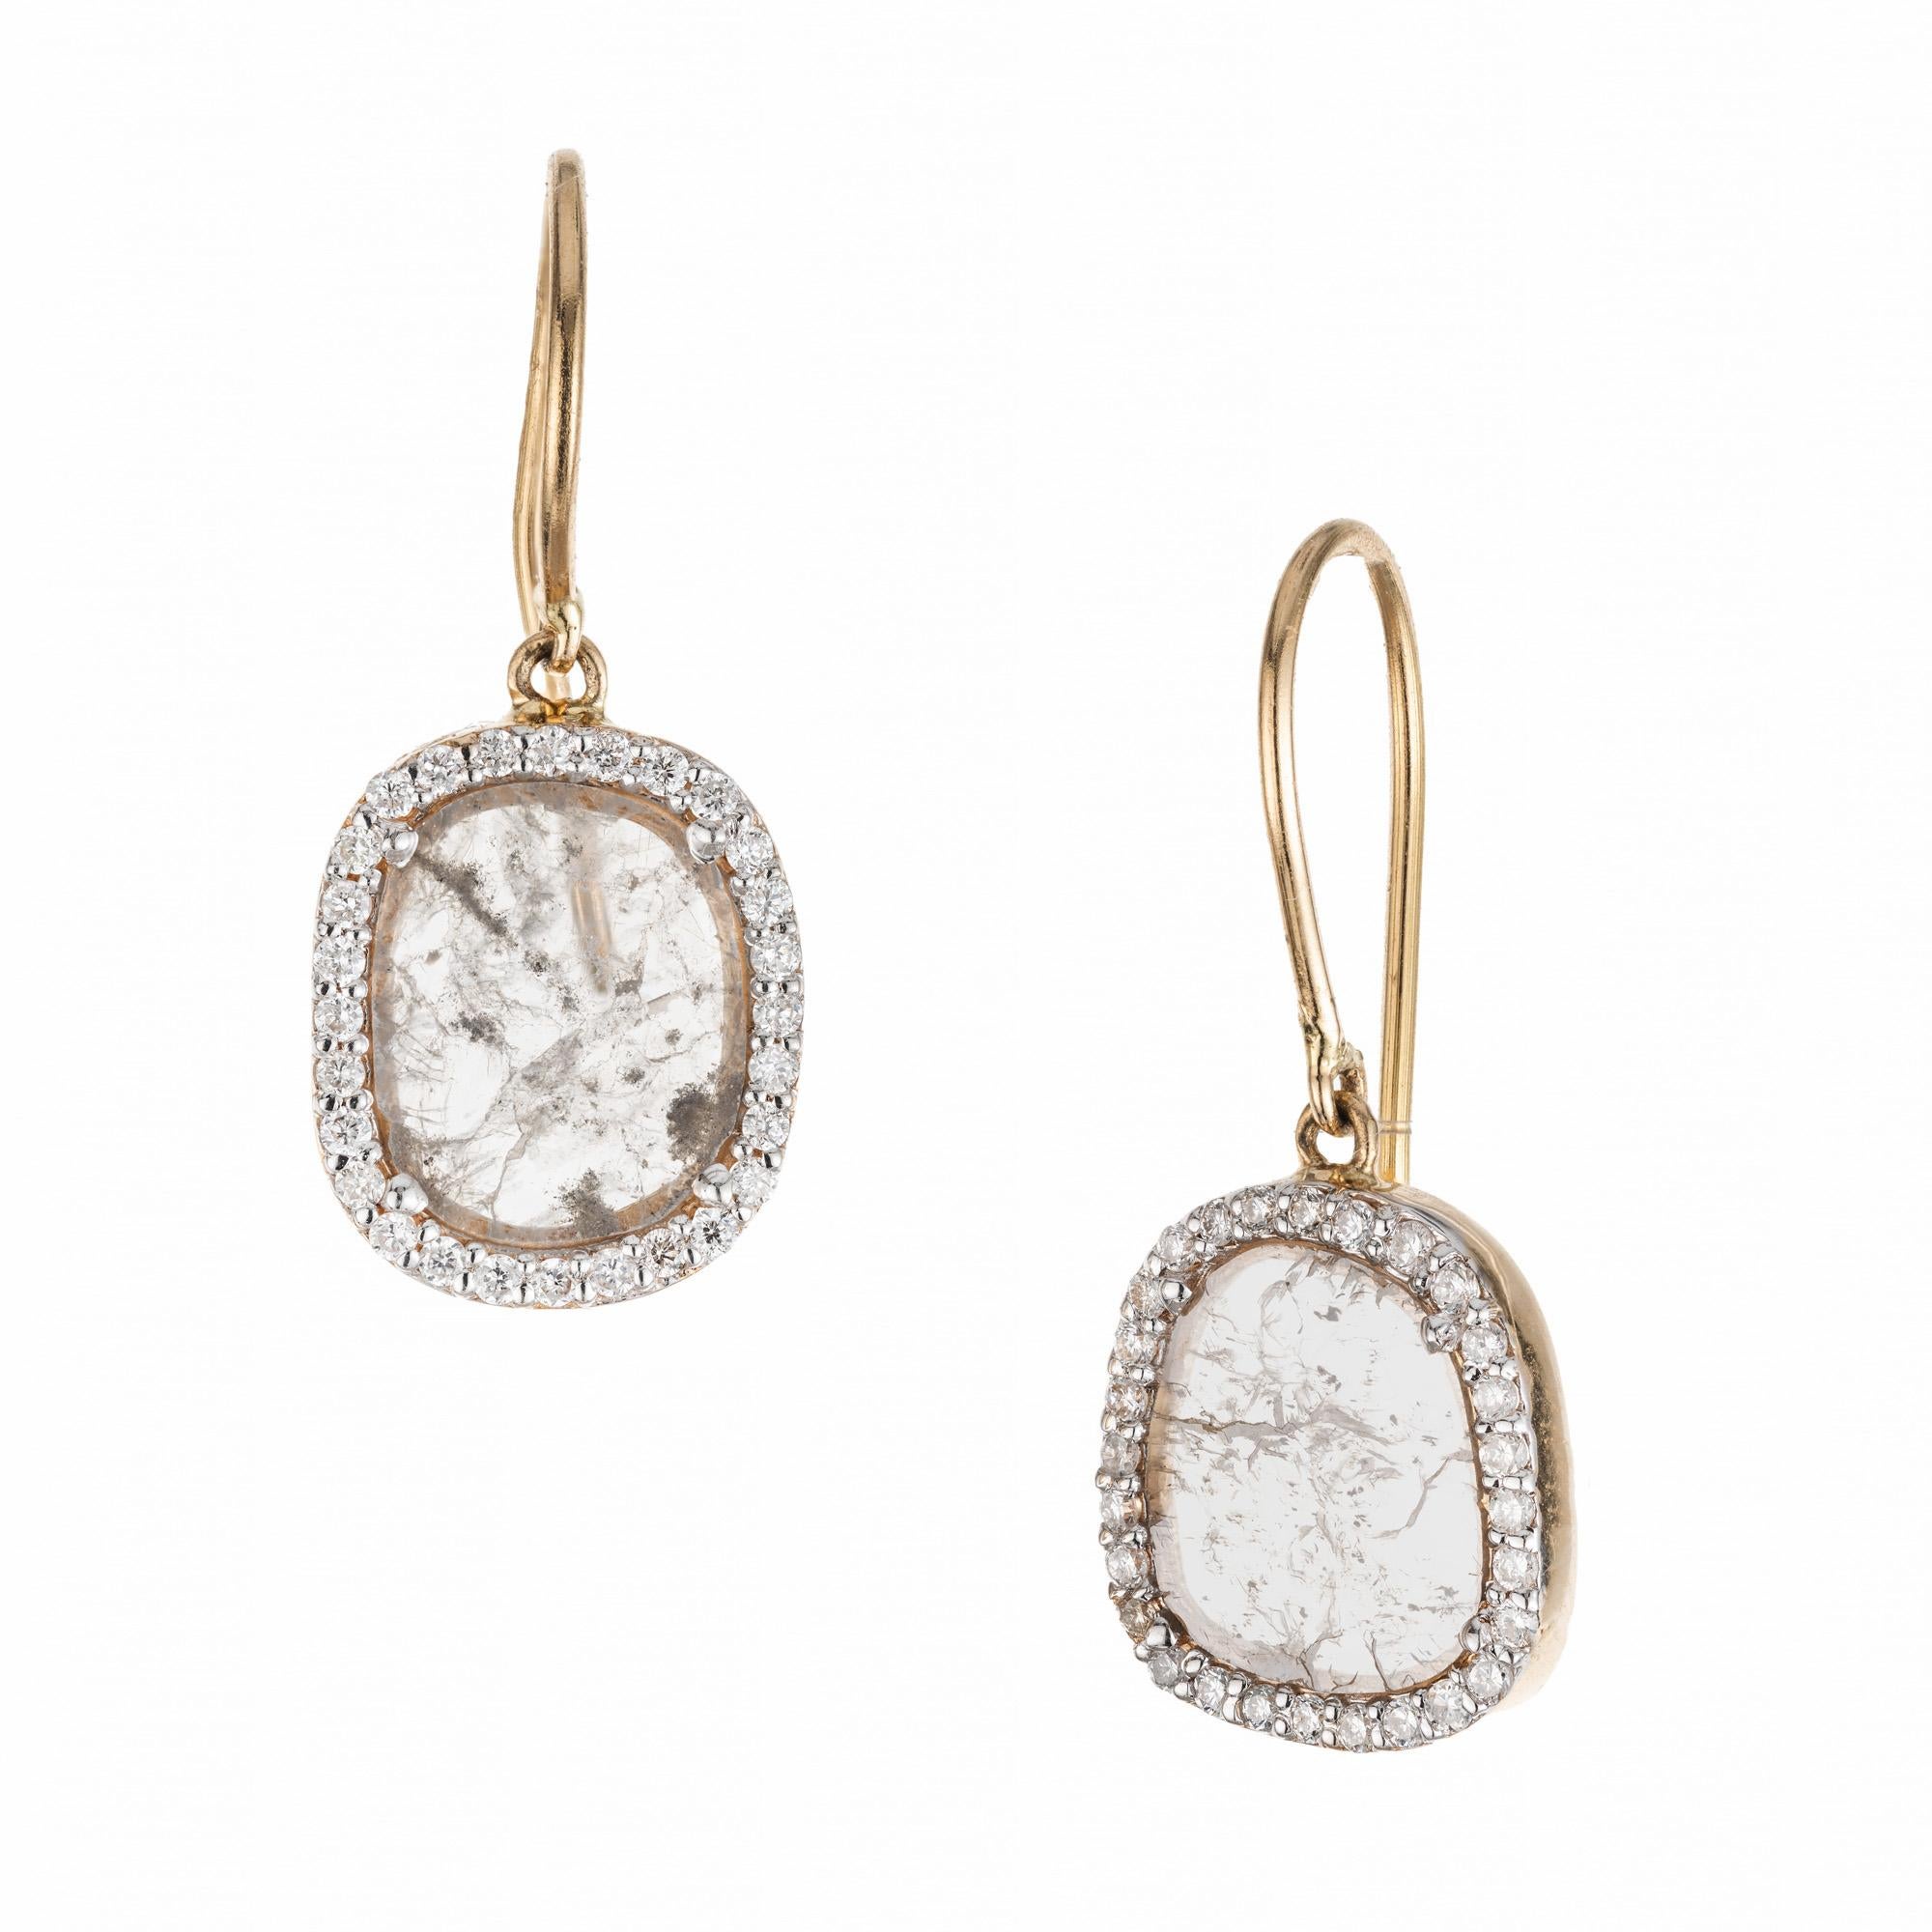 Salt and Pepper Diamond Halo Yellow Gold Dangle Earrings combine elegance and unique style. A beautiful combination of salt and pepper diamonds set in a halo design. The two diamond slices are each enhanced with a halo of 28 round cut diamonds. The